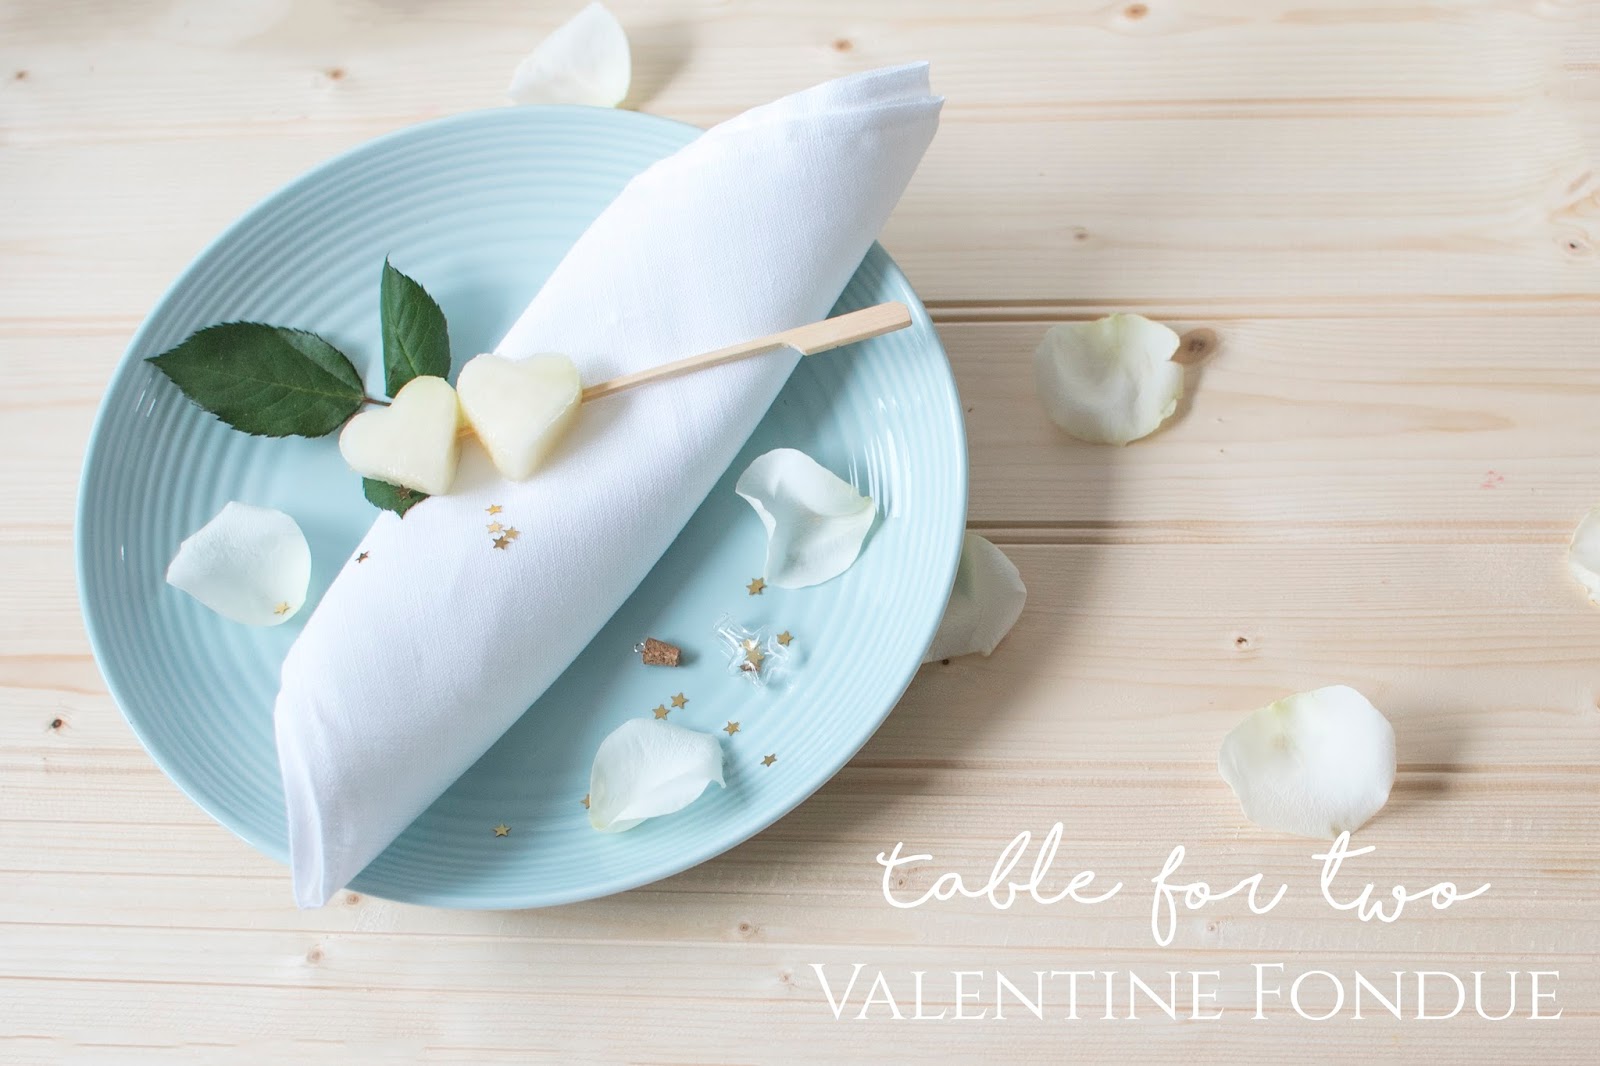 [A TABLE FOR TWO] VALENTINE FONDUE DATE NIGHT